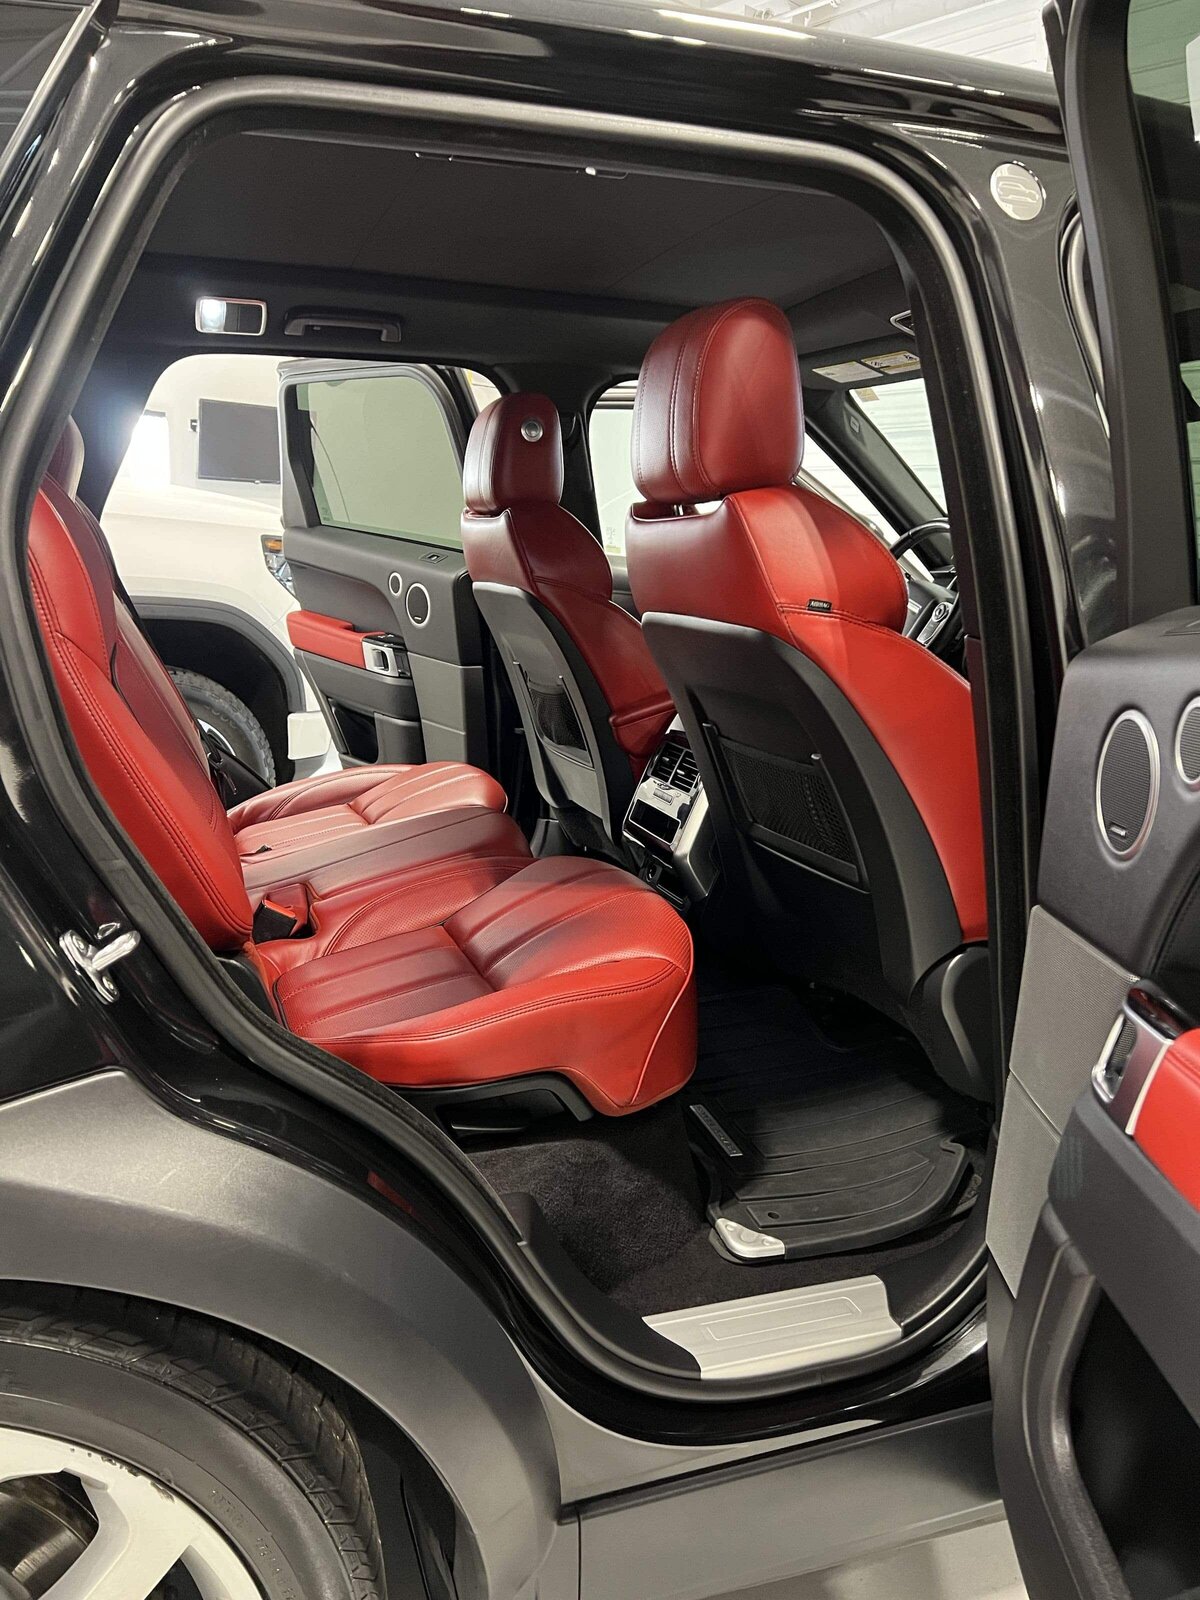 a-nice-touch-auto-detailing-red-leather-condition-treatment-meticulous-interior-cleaning-silver-car